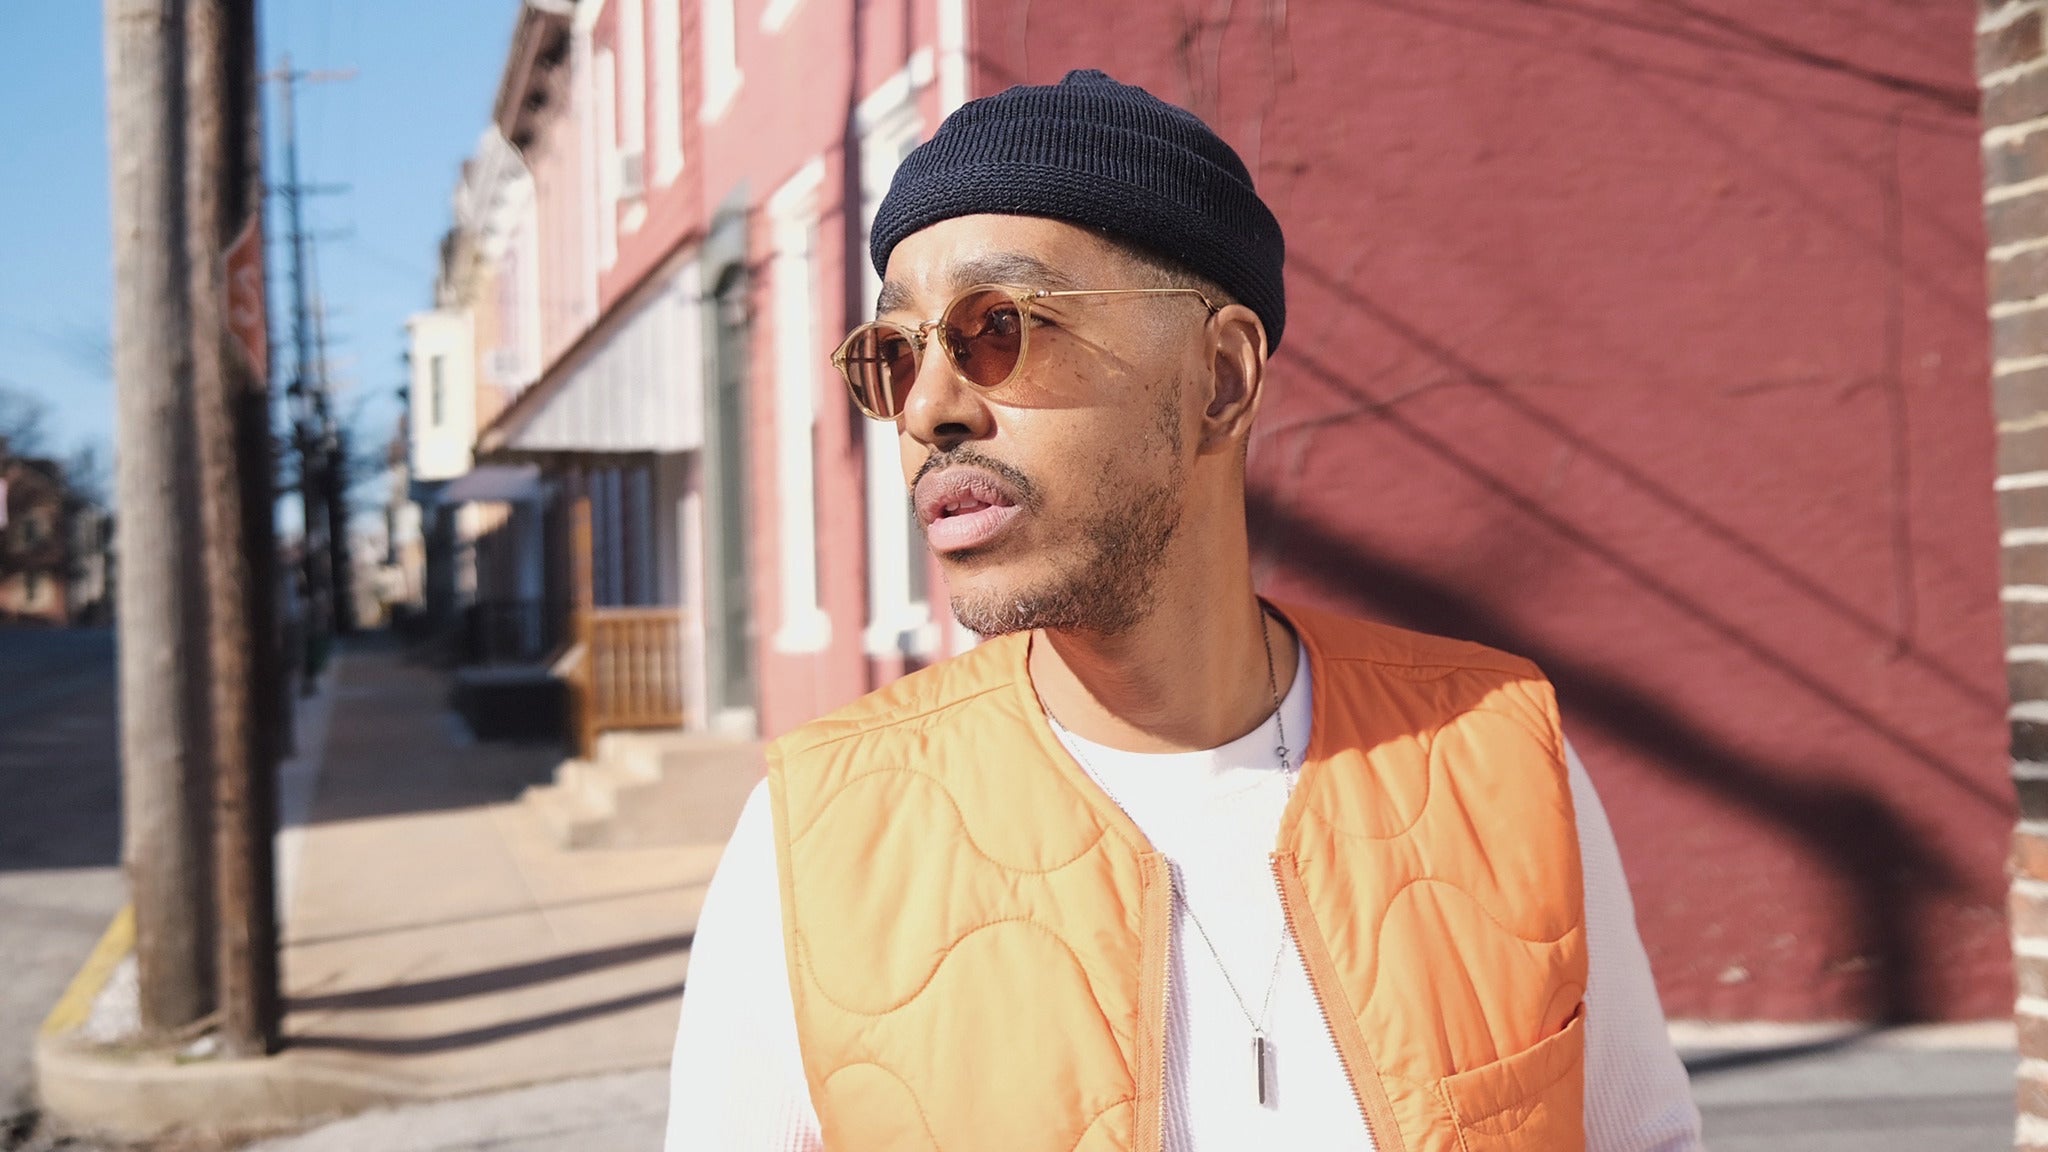 Image used with permission from Ticketmaster | Oddisee tickets